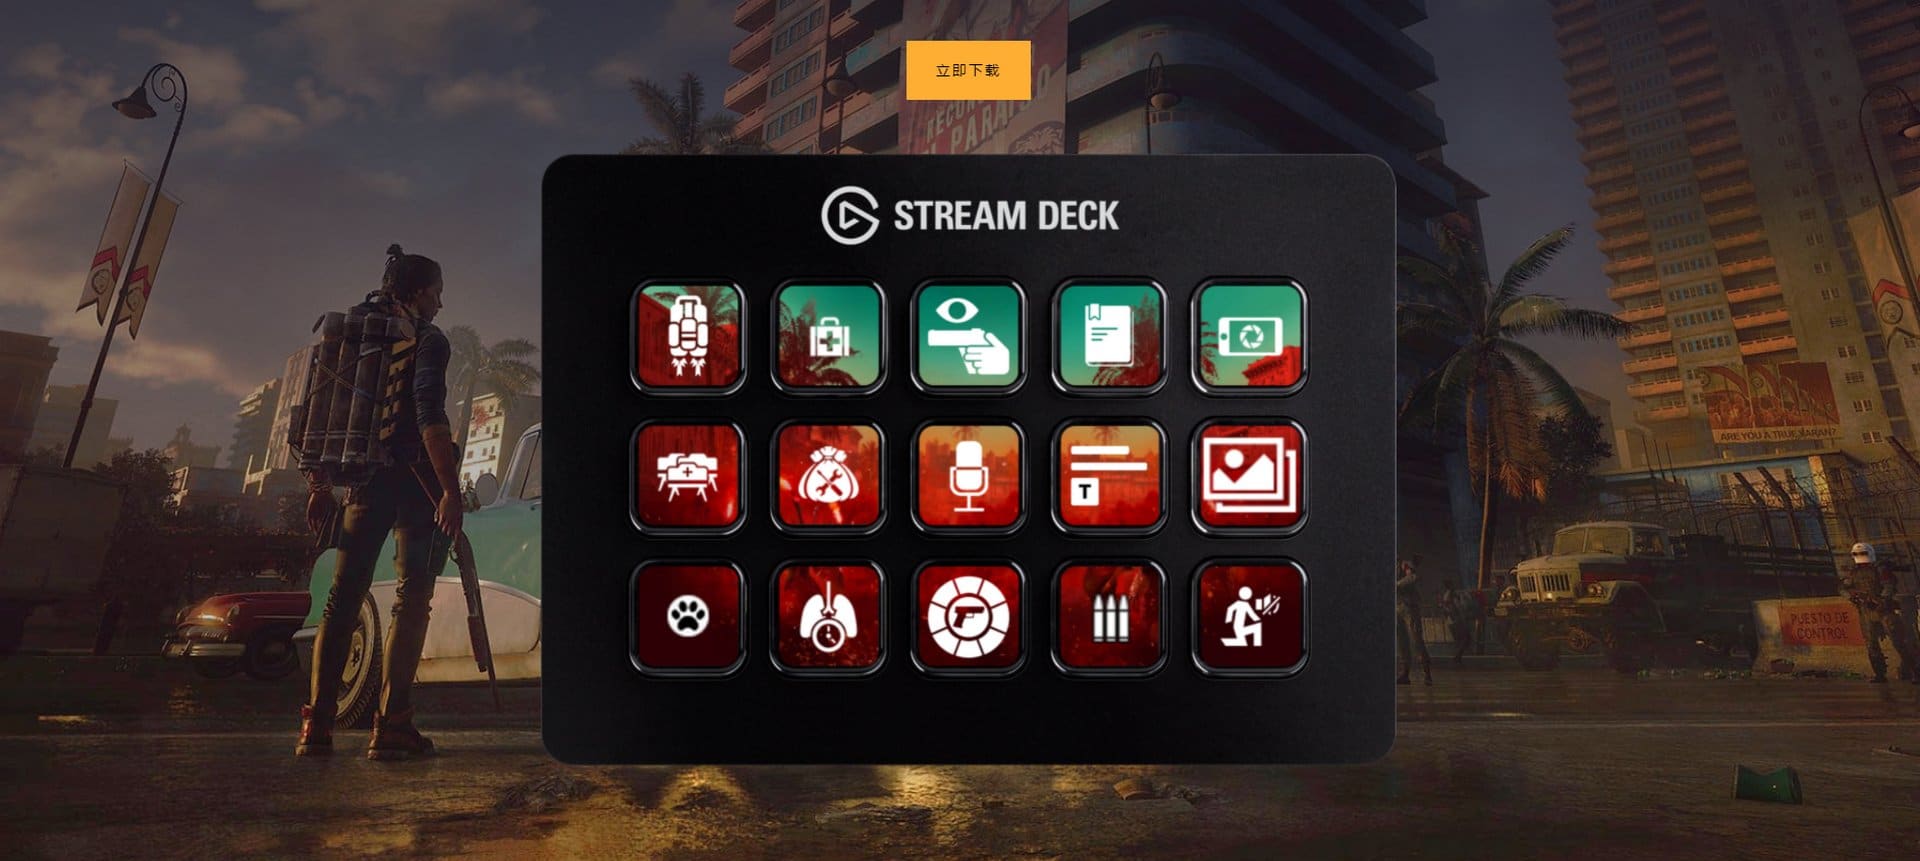 iCUE_FarCry6_StreamDeck